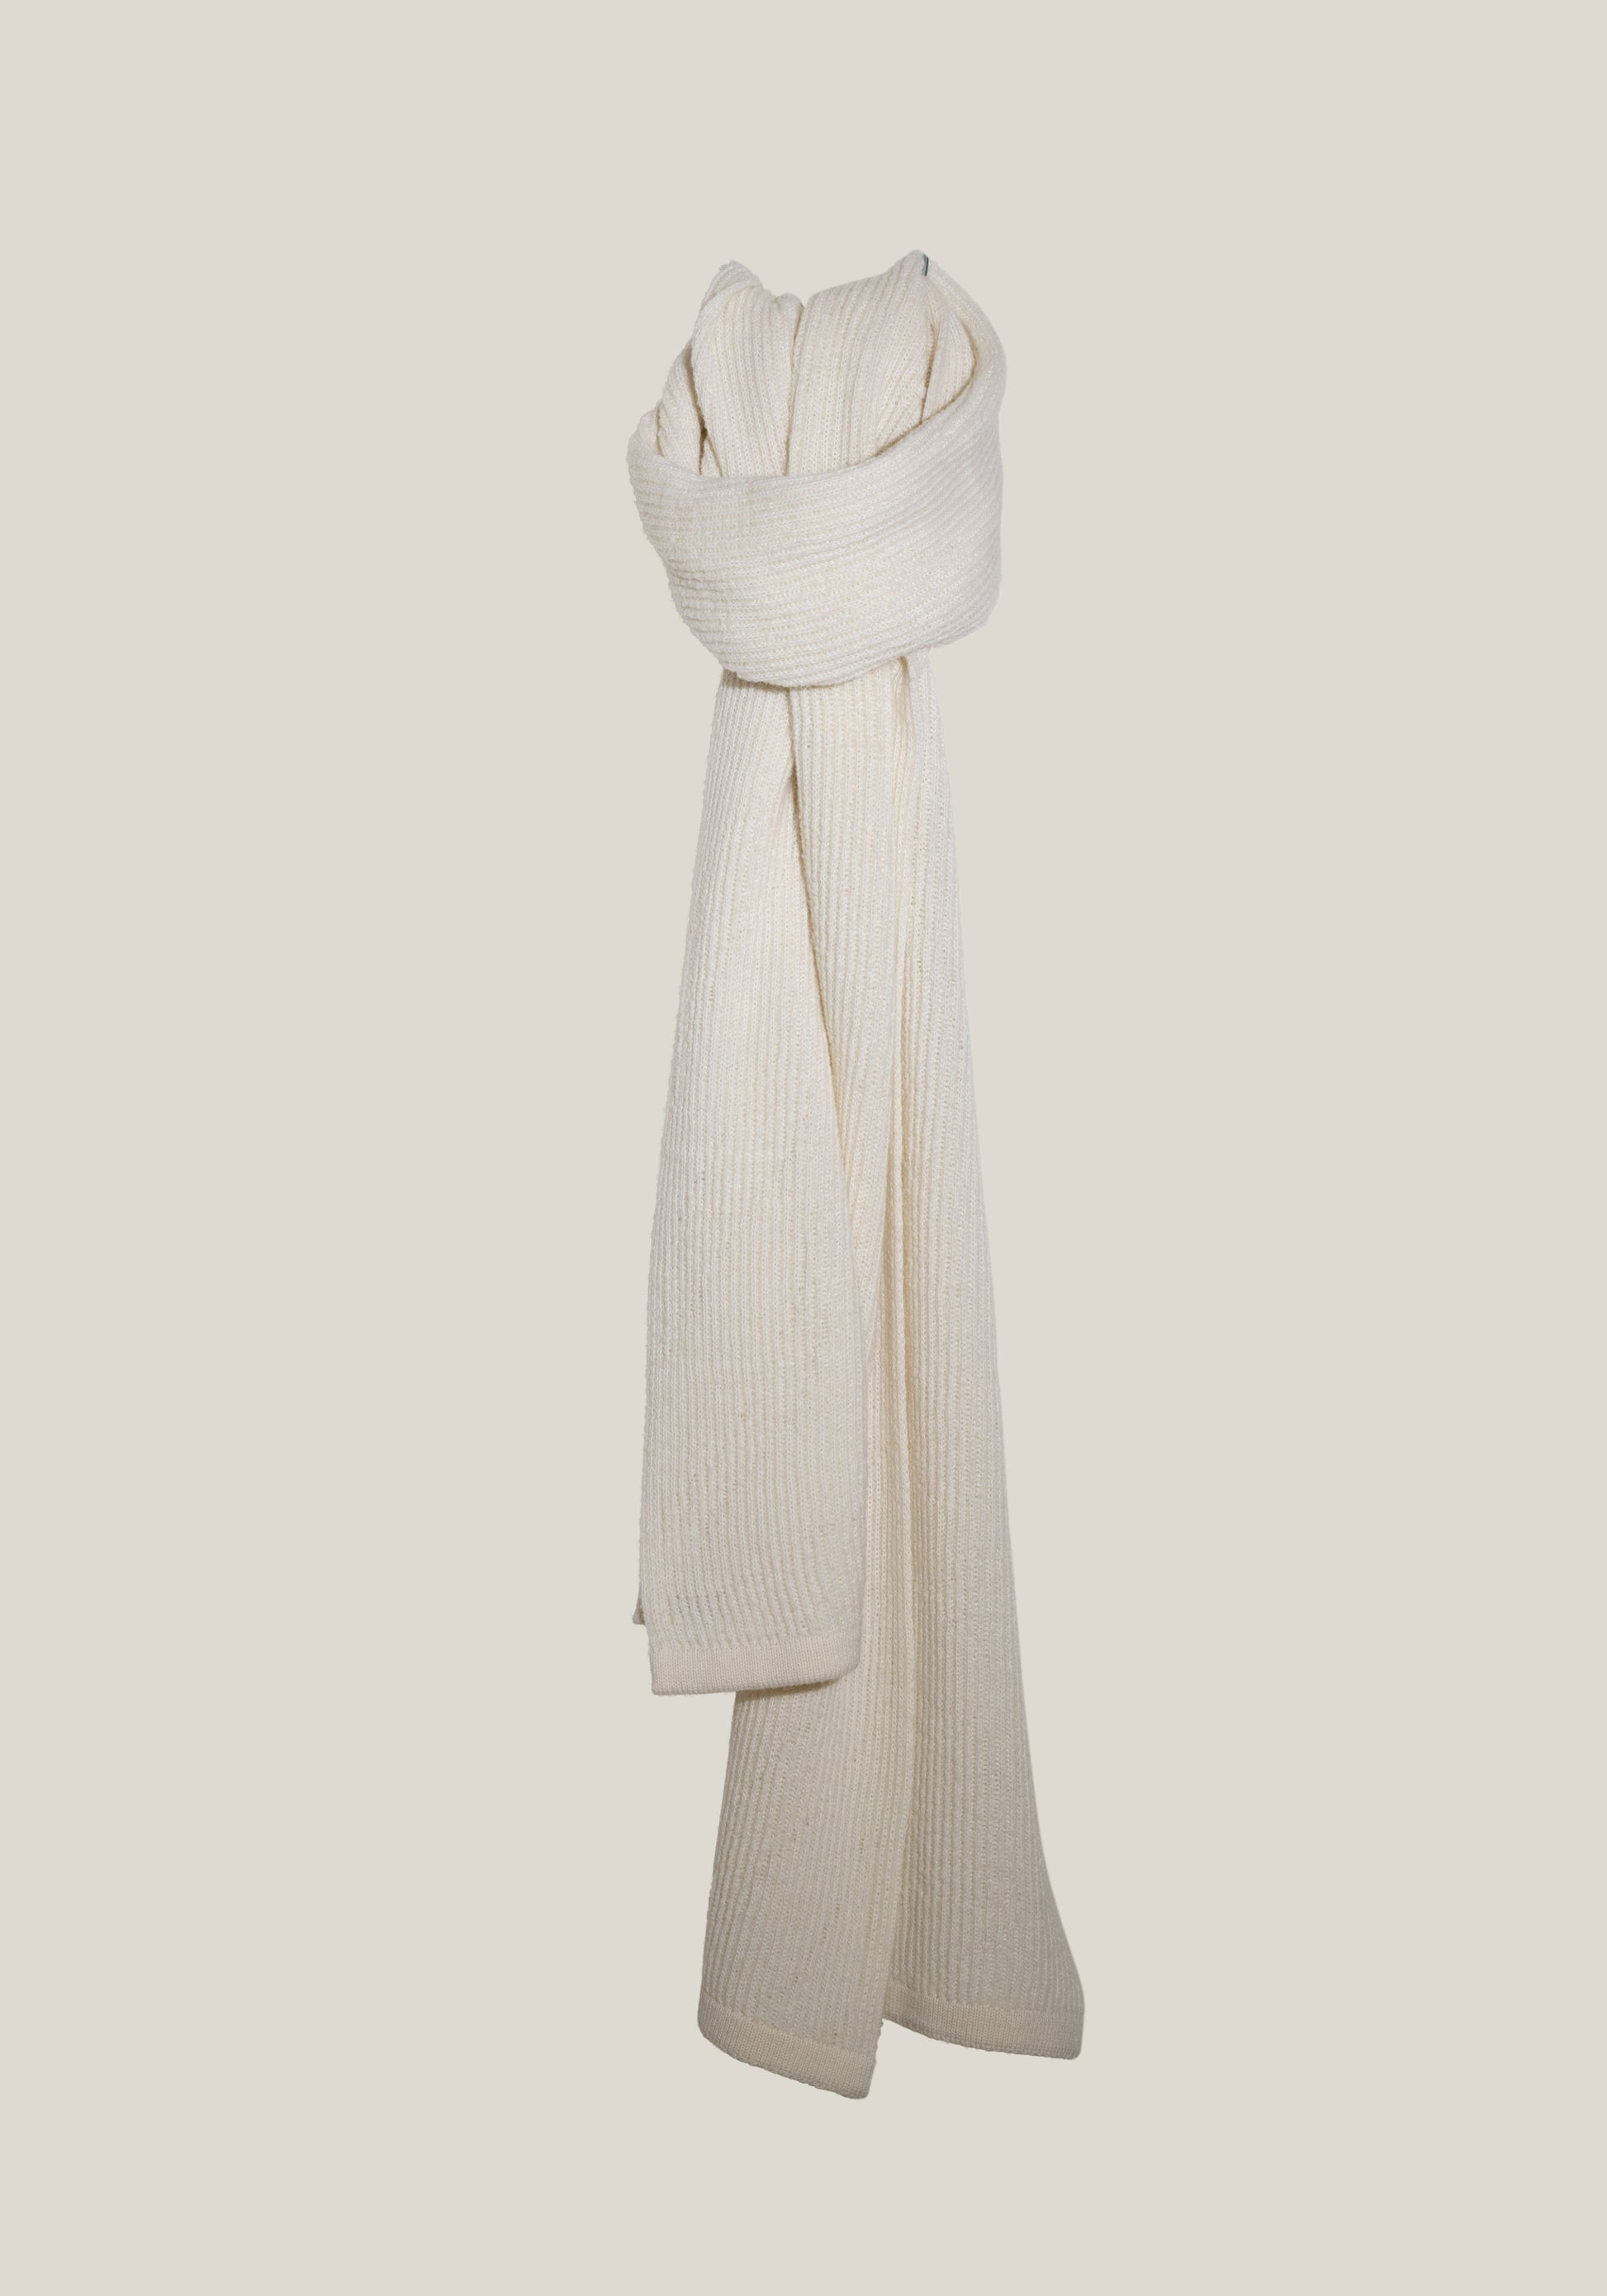 Wool long scarf with white-white pattern